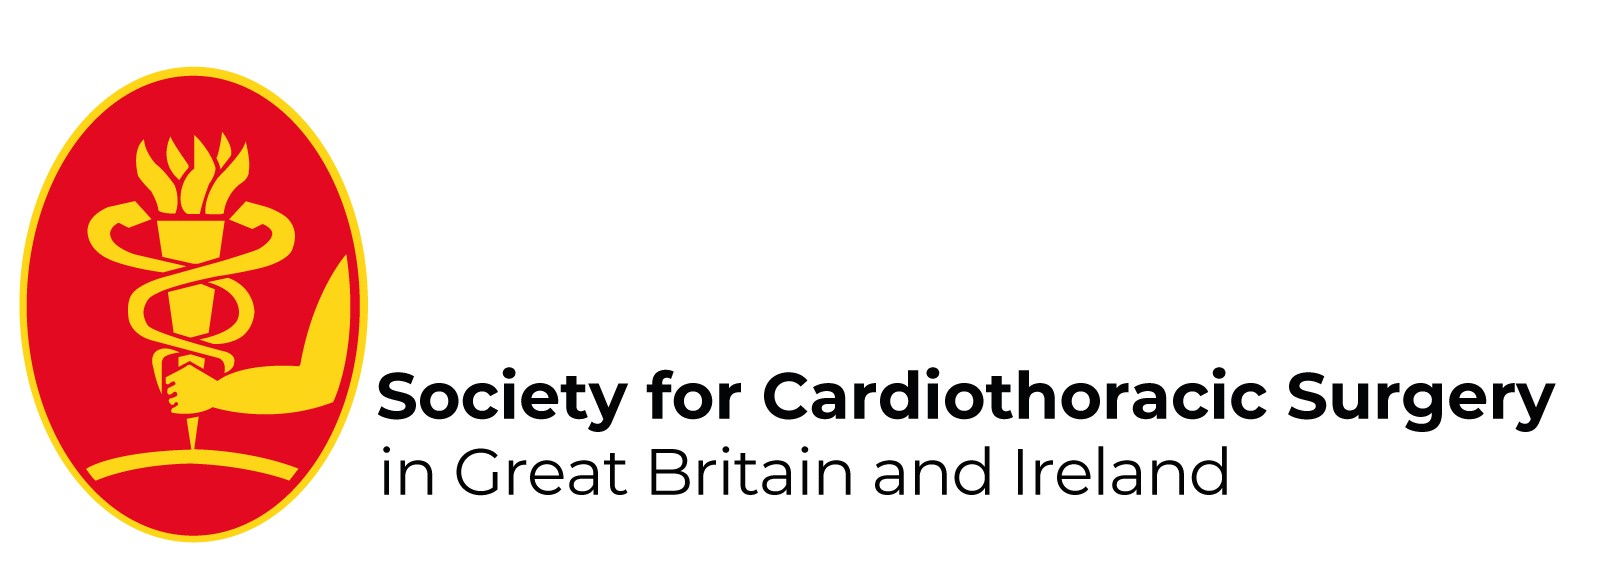 Society for Cardiothoracic Surgery